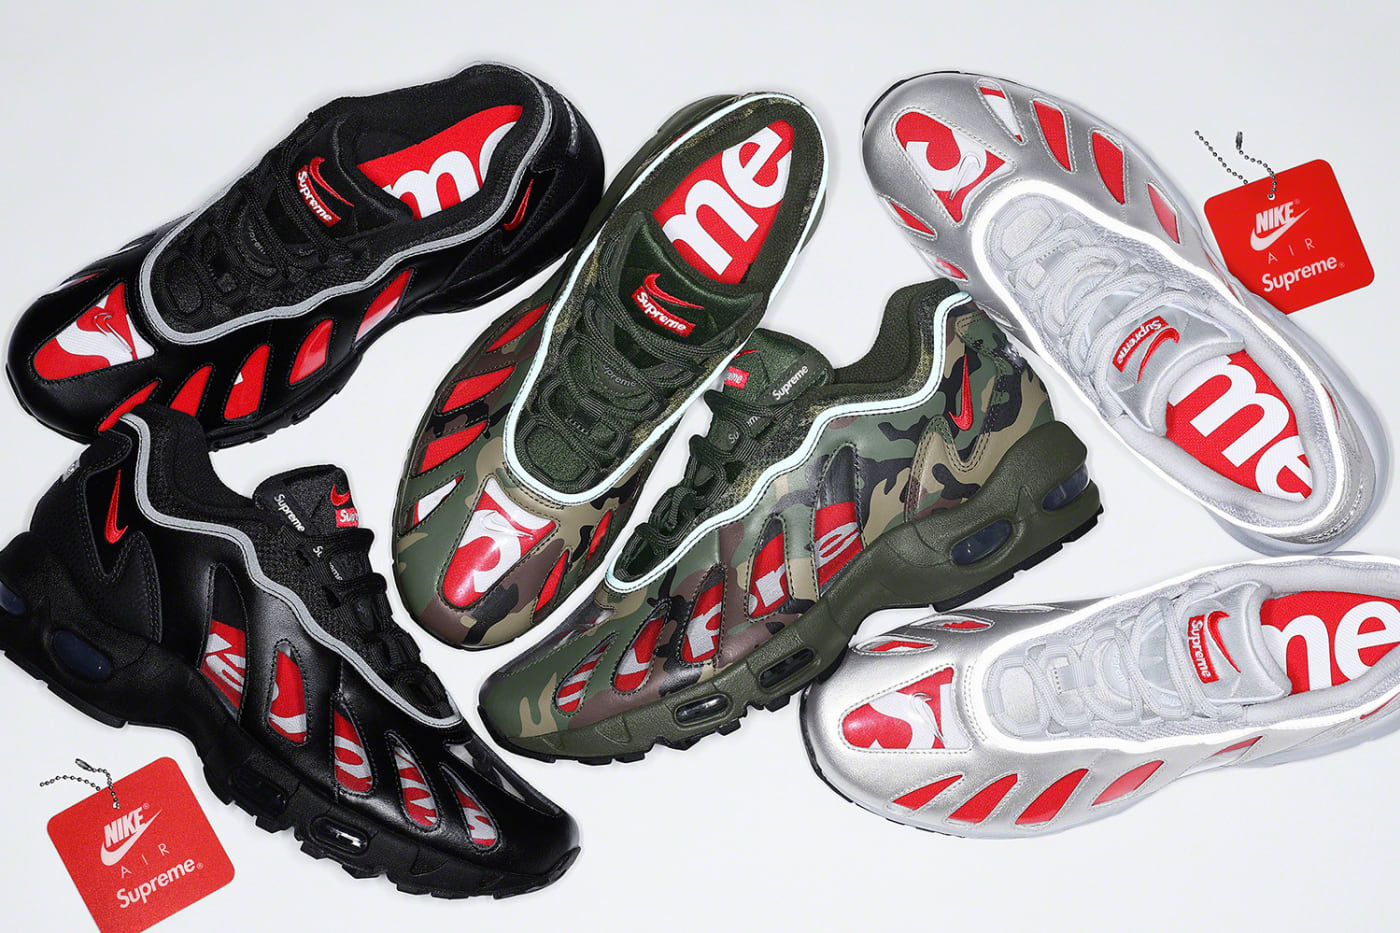 hypothese Mam Bezwaar Supreme x Nike Sneaker Collaborations: Ranking The Shoes | Complex